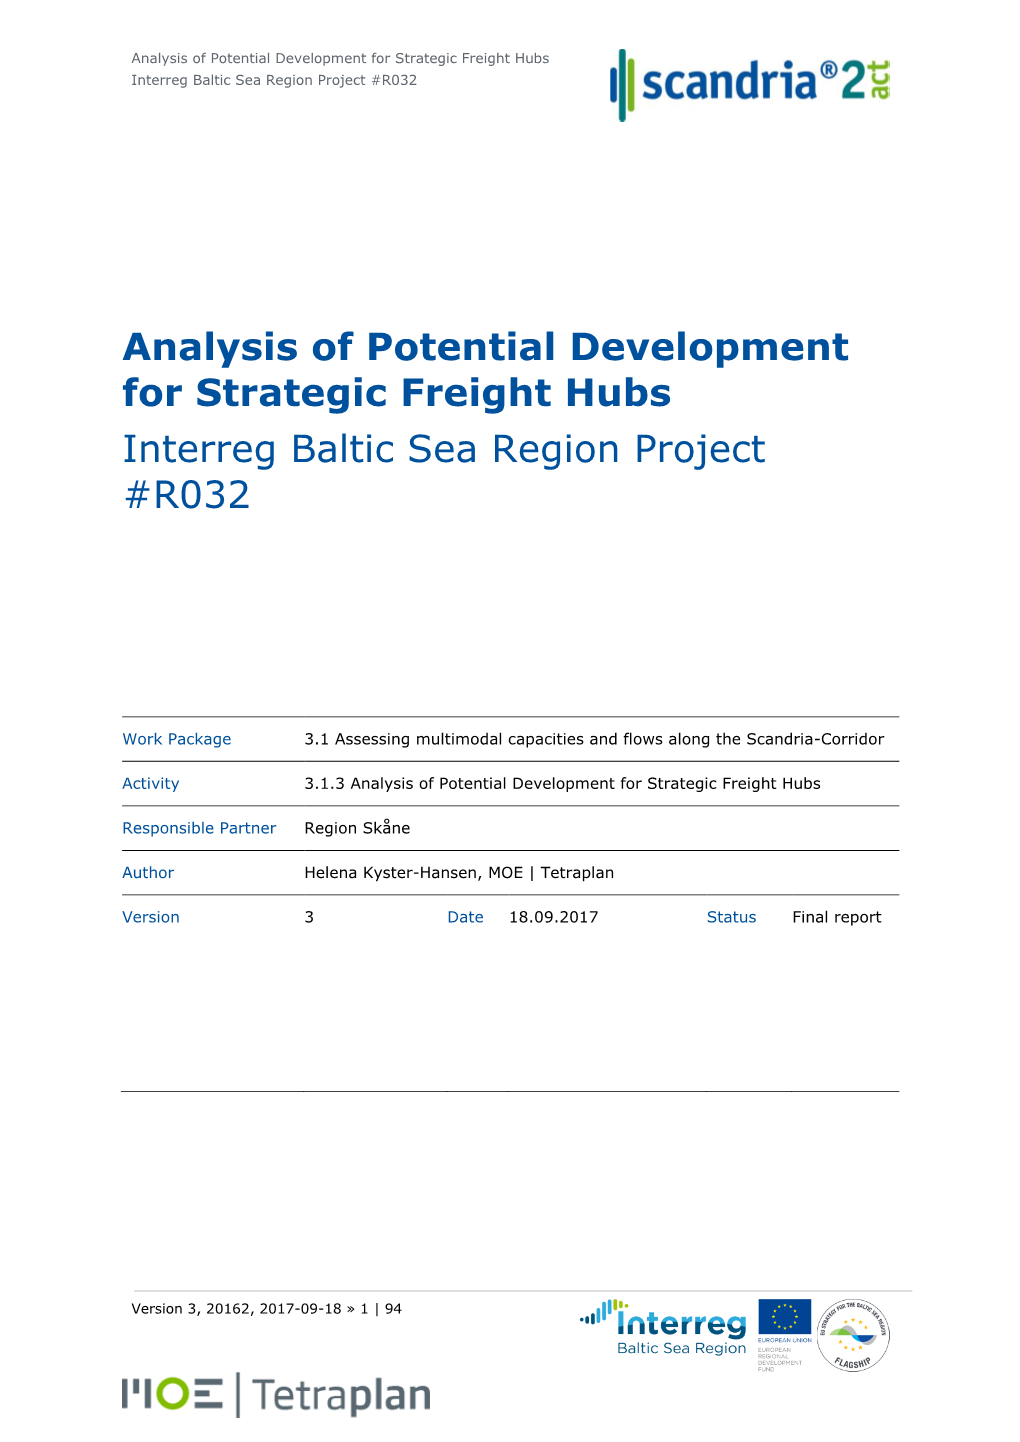 “Analysis of Potential Development for Strategic Freight Hubs”